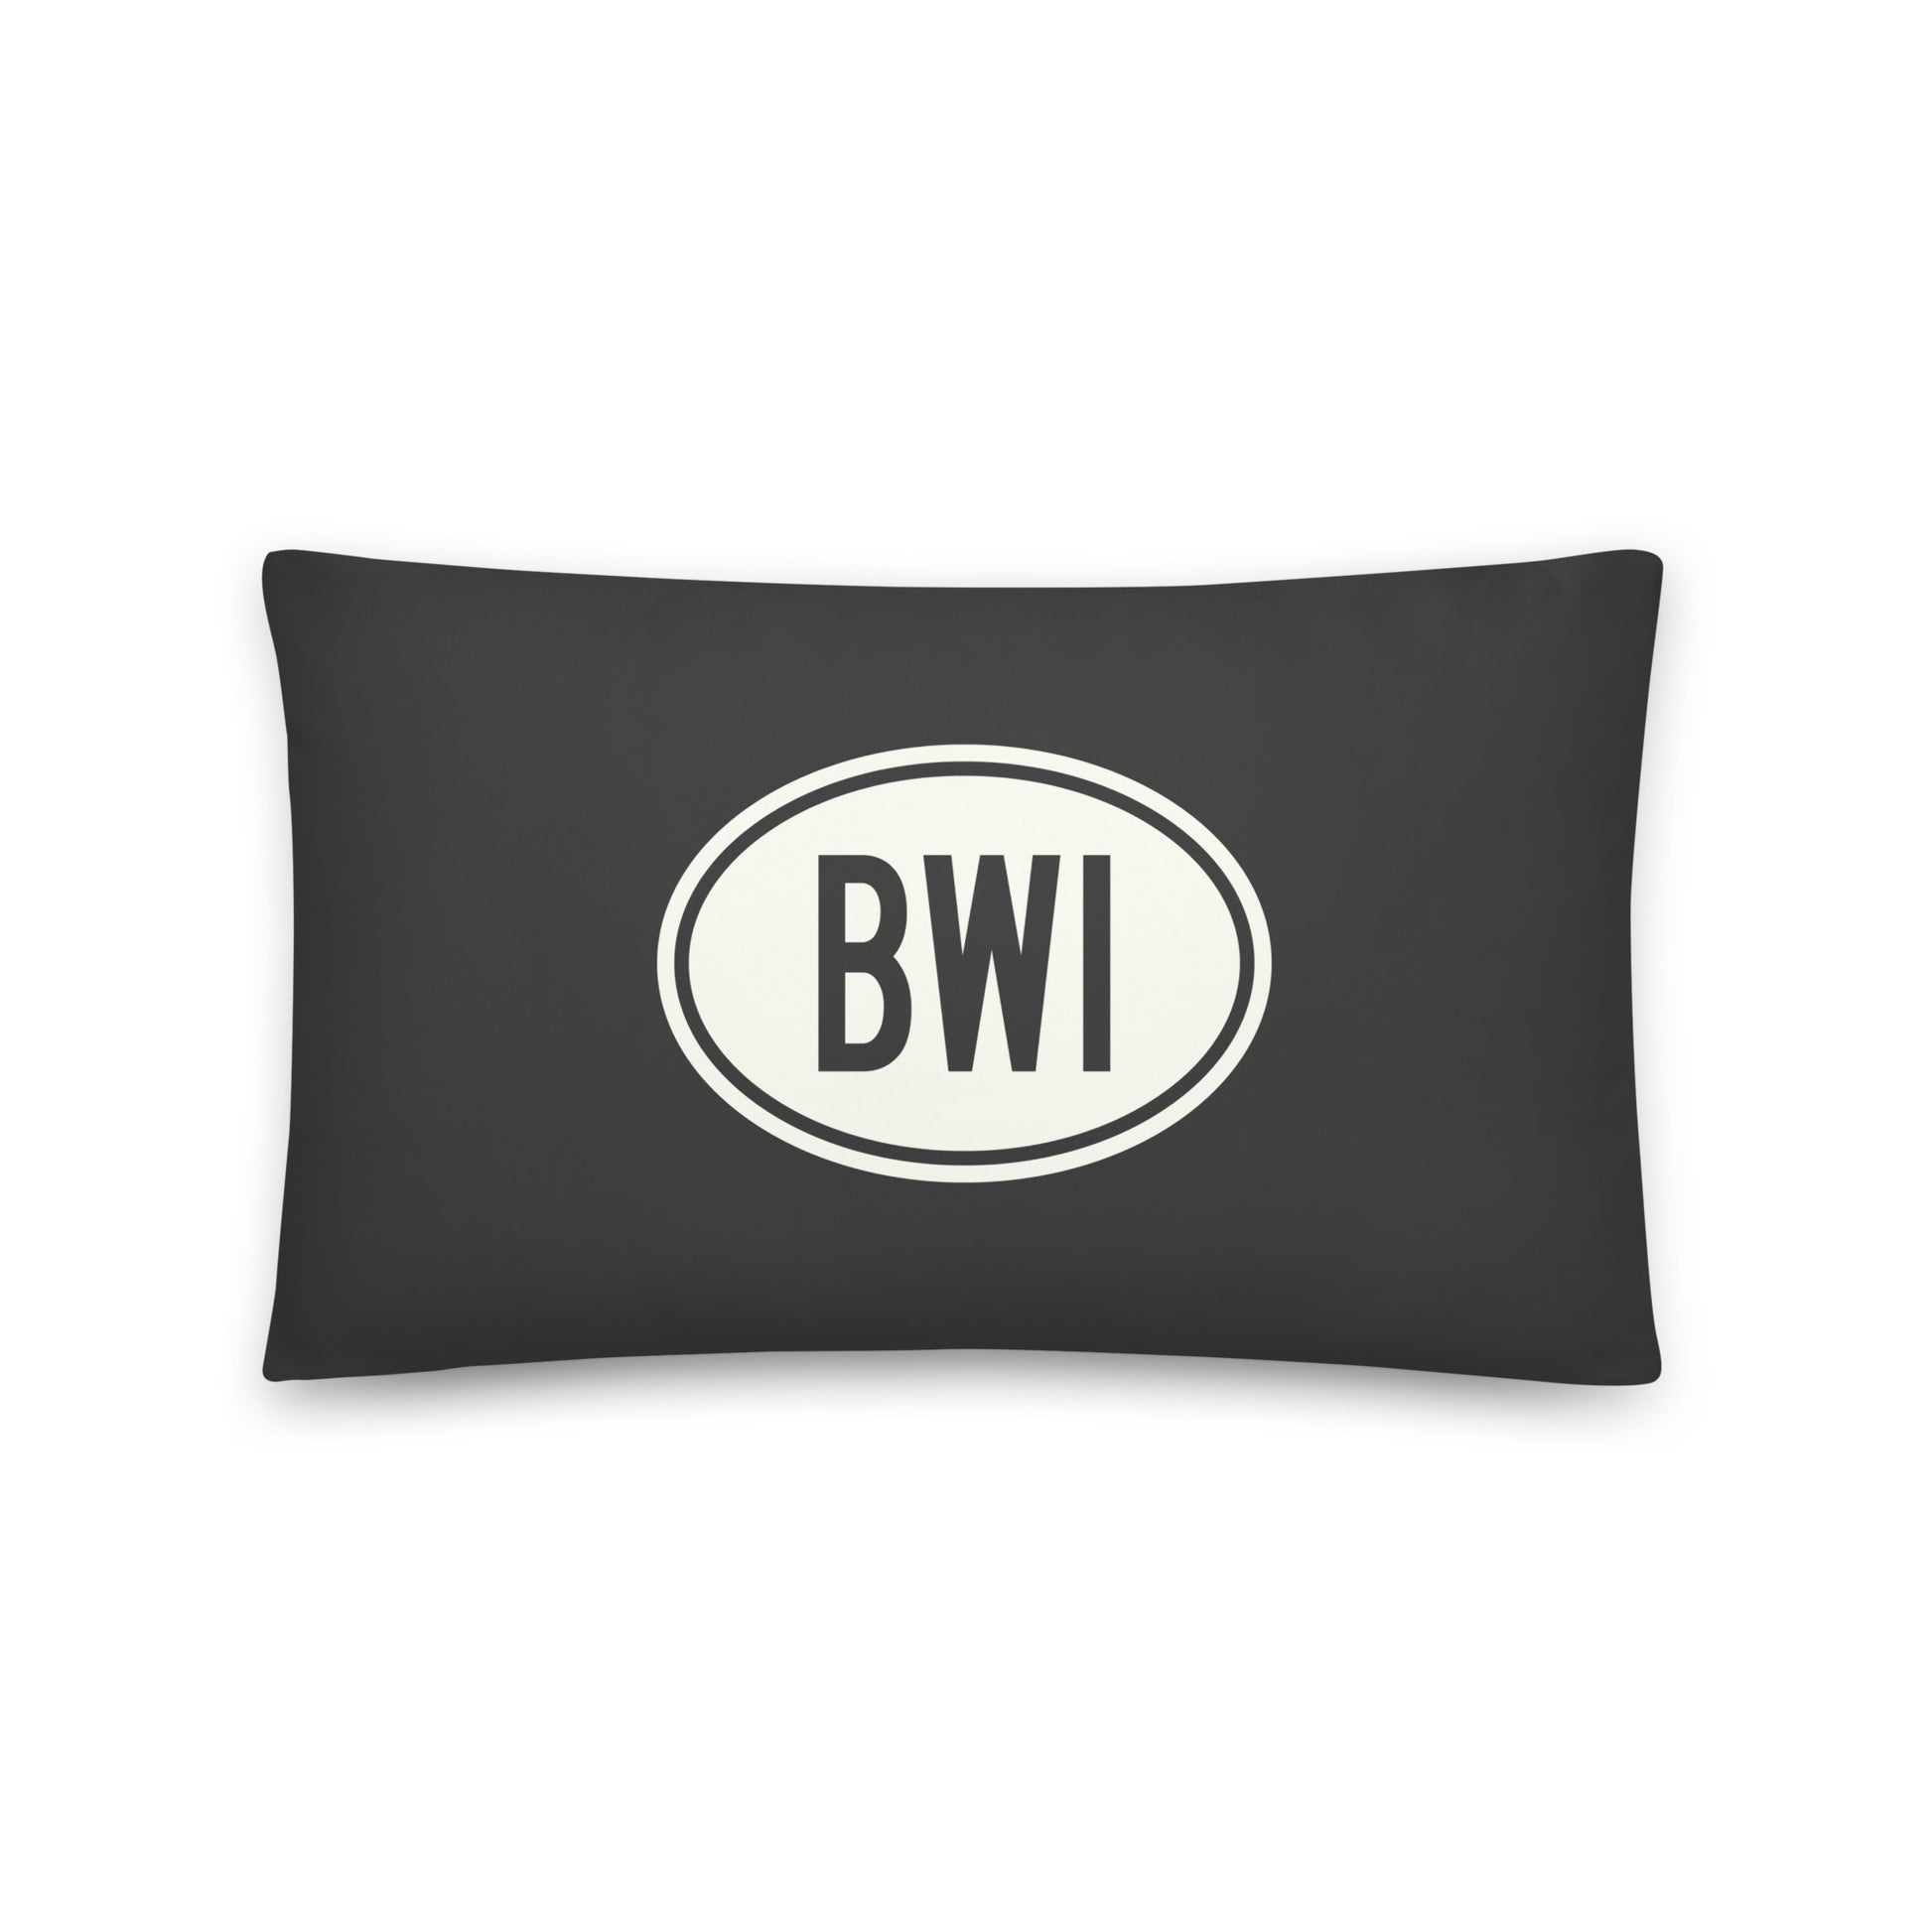 Unique Travel Gift Throw Pillow - White Oval • BWI Baltimore • YHM Designs - Image 01